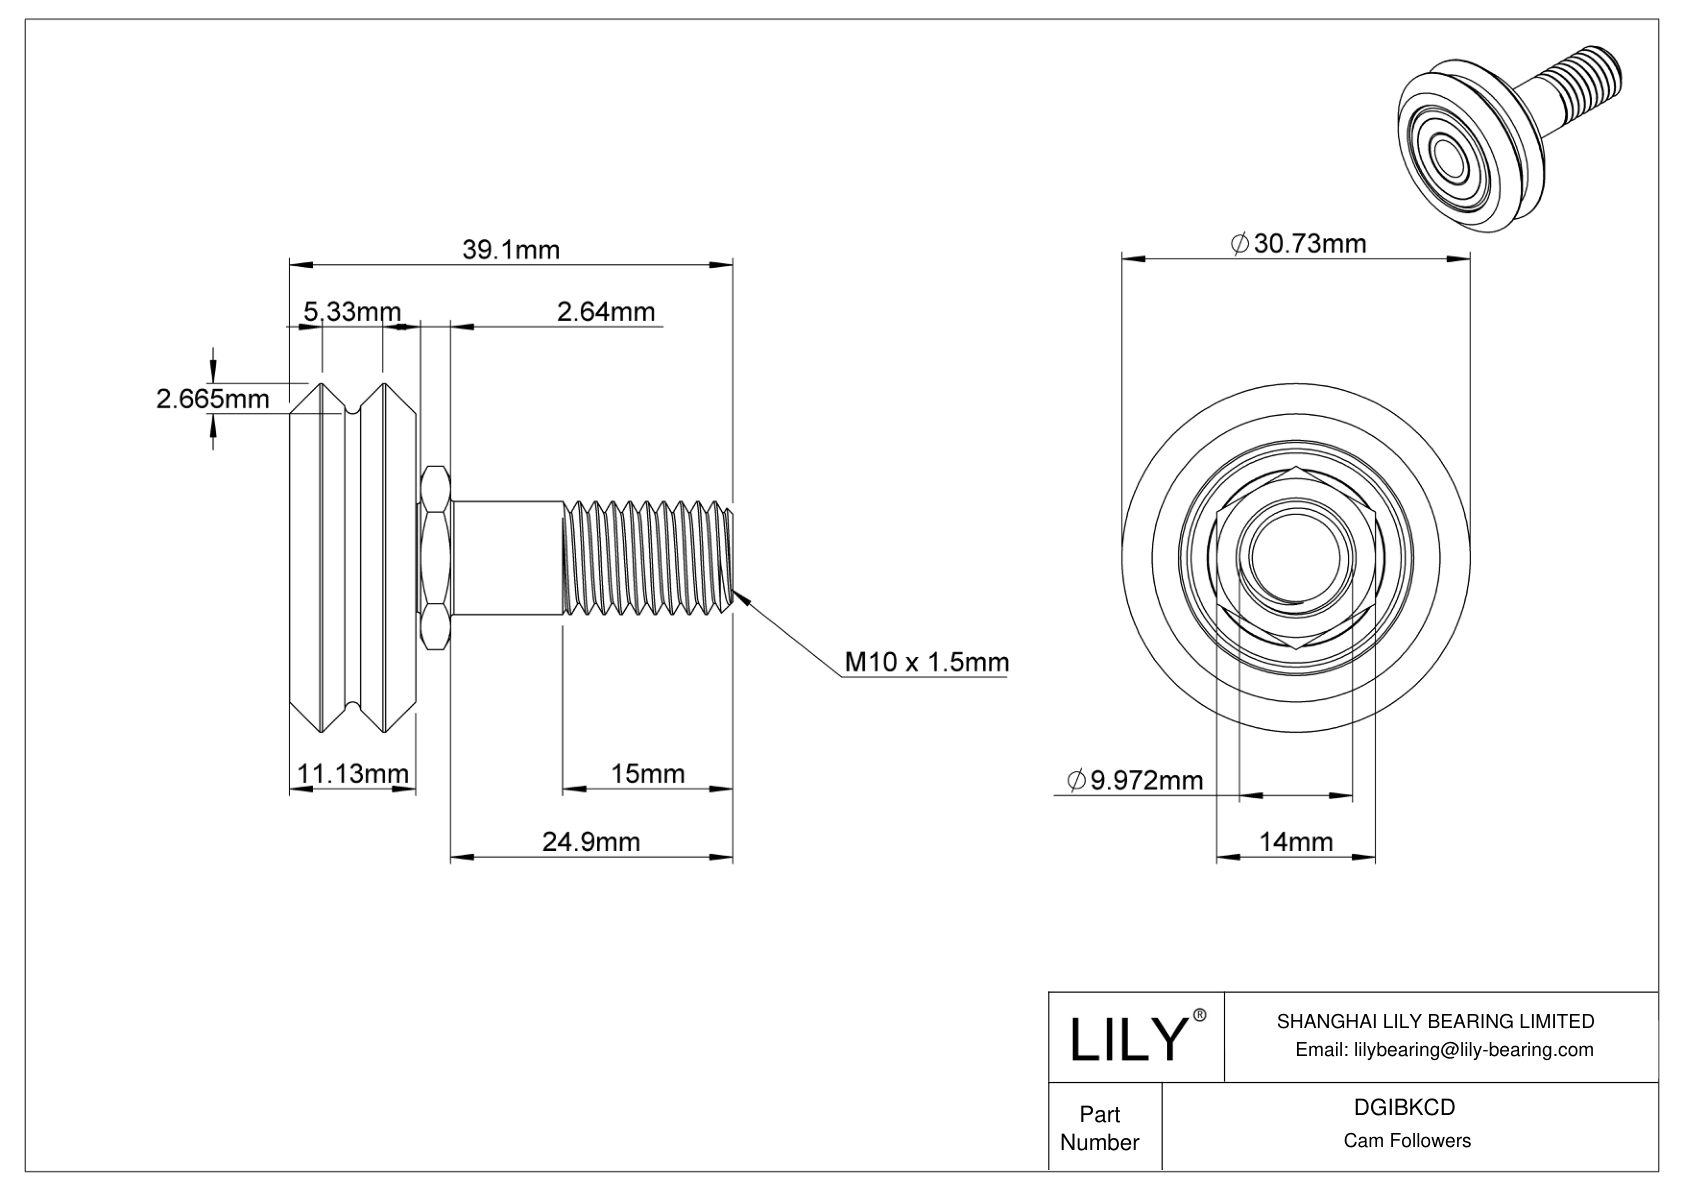 DGIBKCD Threaded V-Groove Track Rollers cad drawing